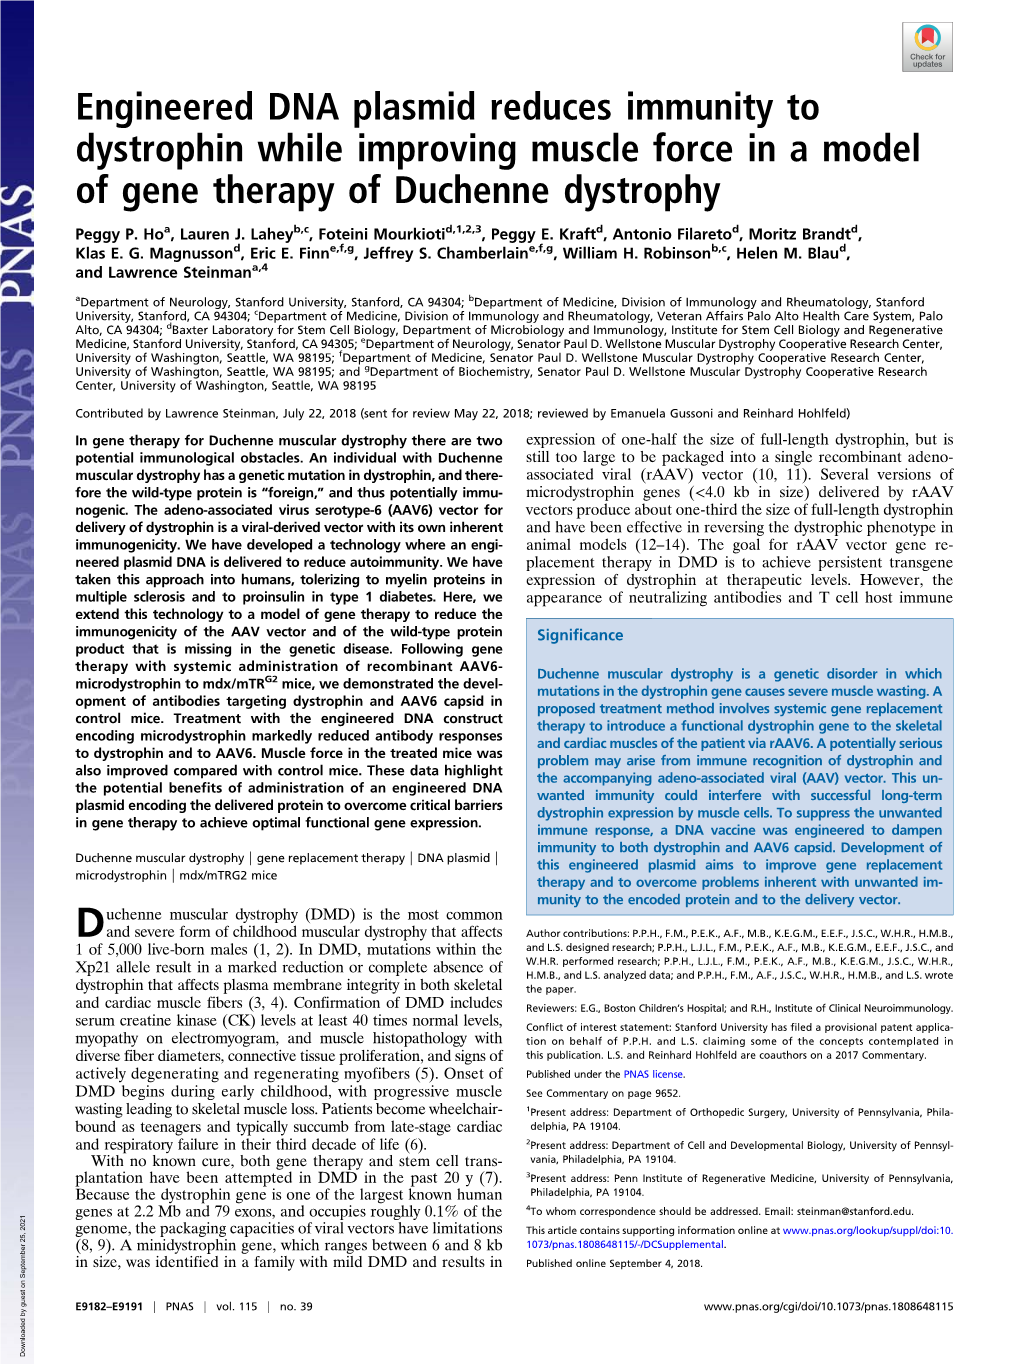 Engineered DNA Plasmid Reduces Immunity to Dystrophin While Improving Muscle Force in a Model of Gene Therapy of Duchenne Dystrophy